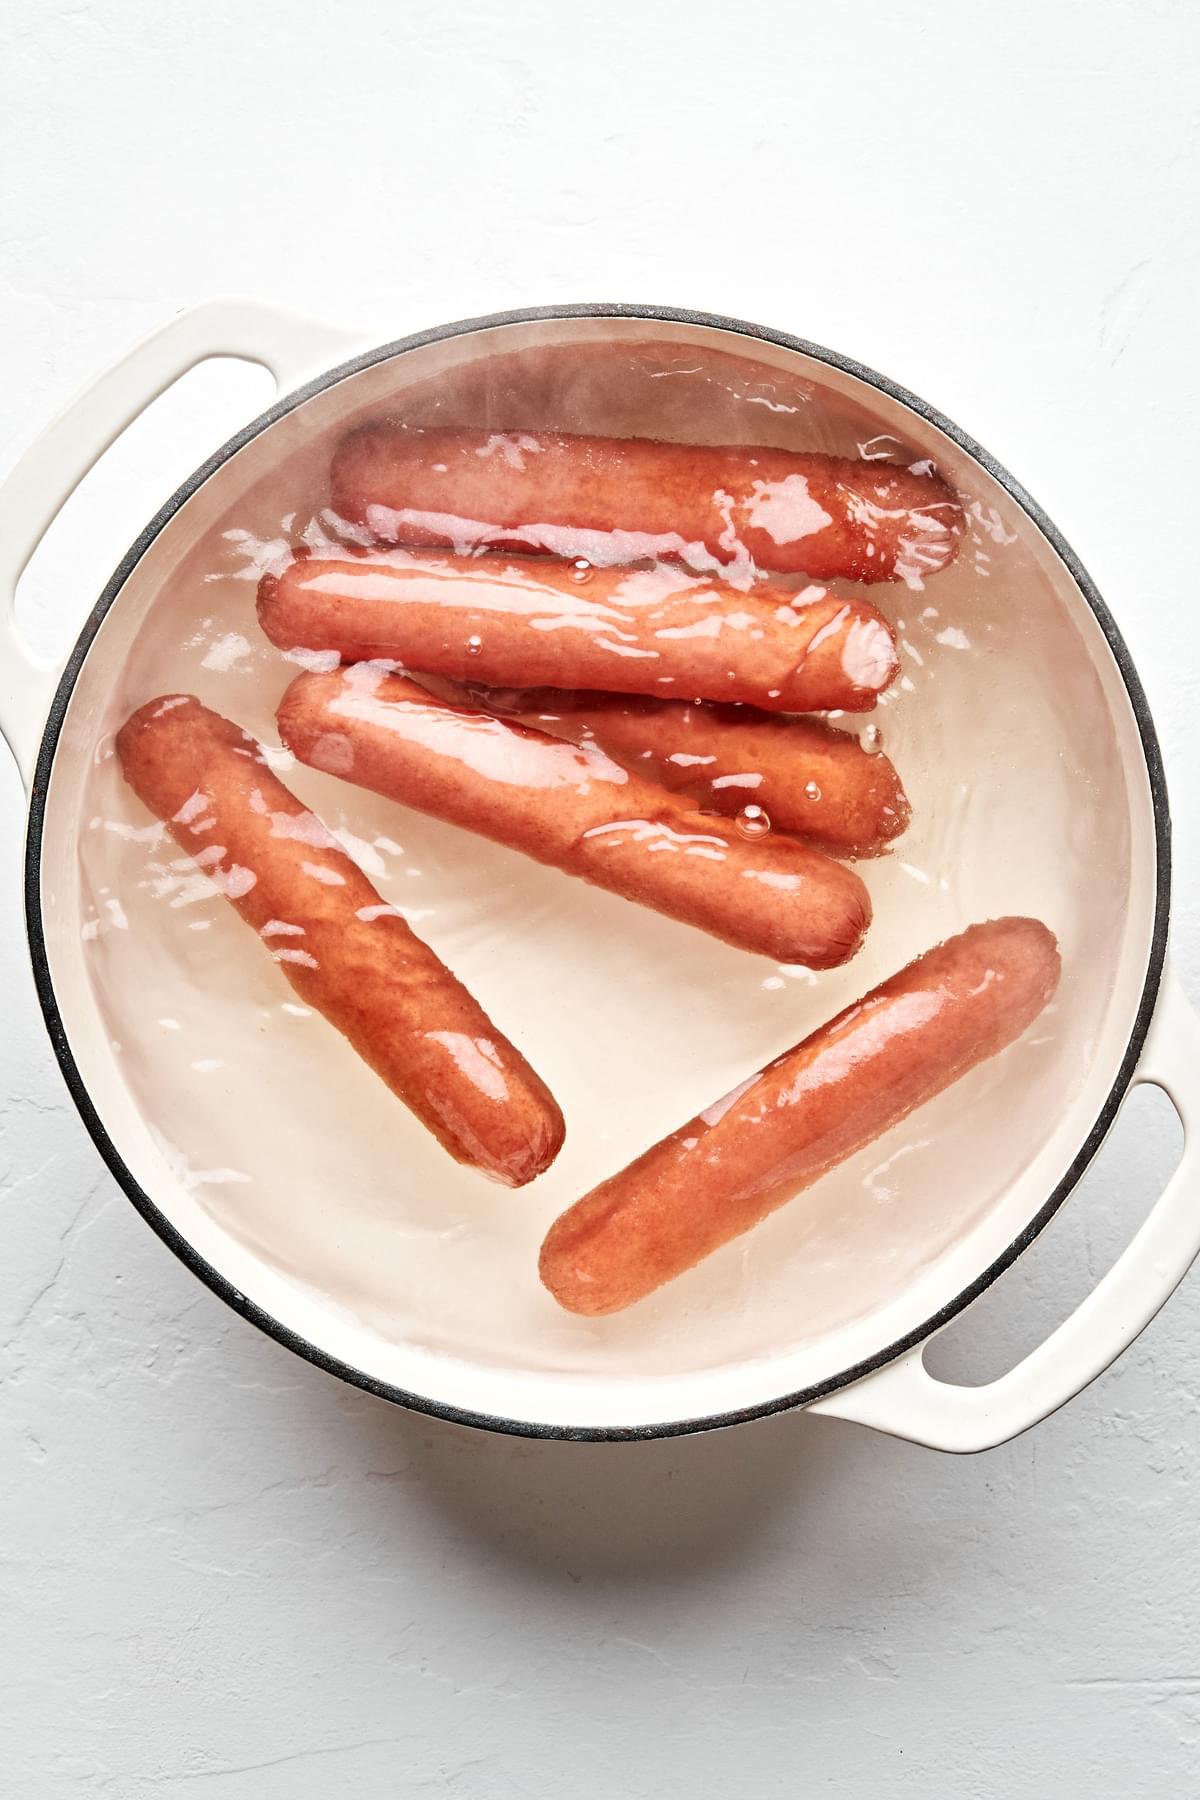 6 hot dogs being cooked in boiling water